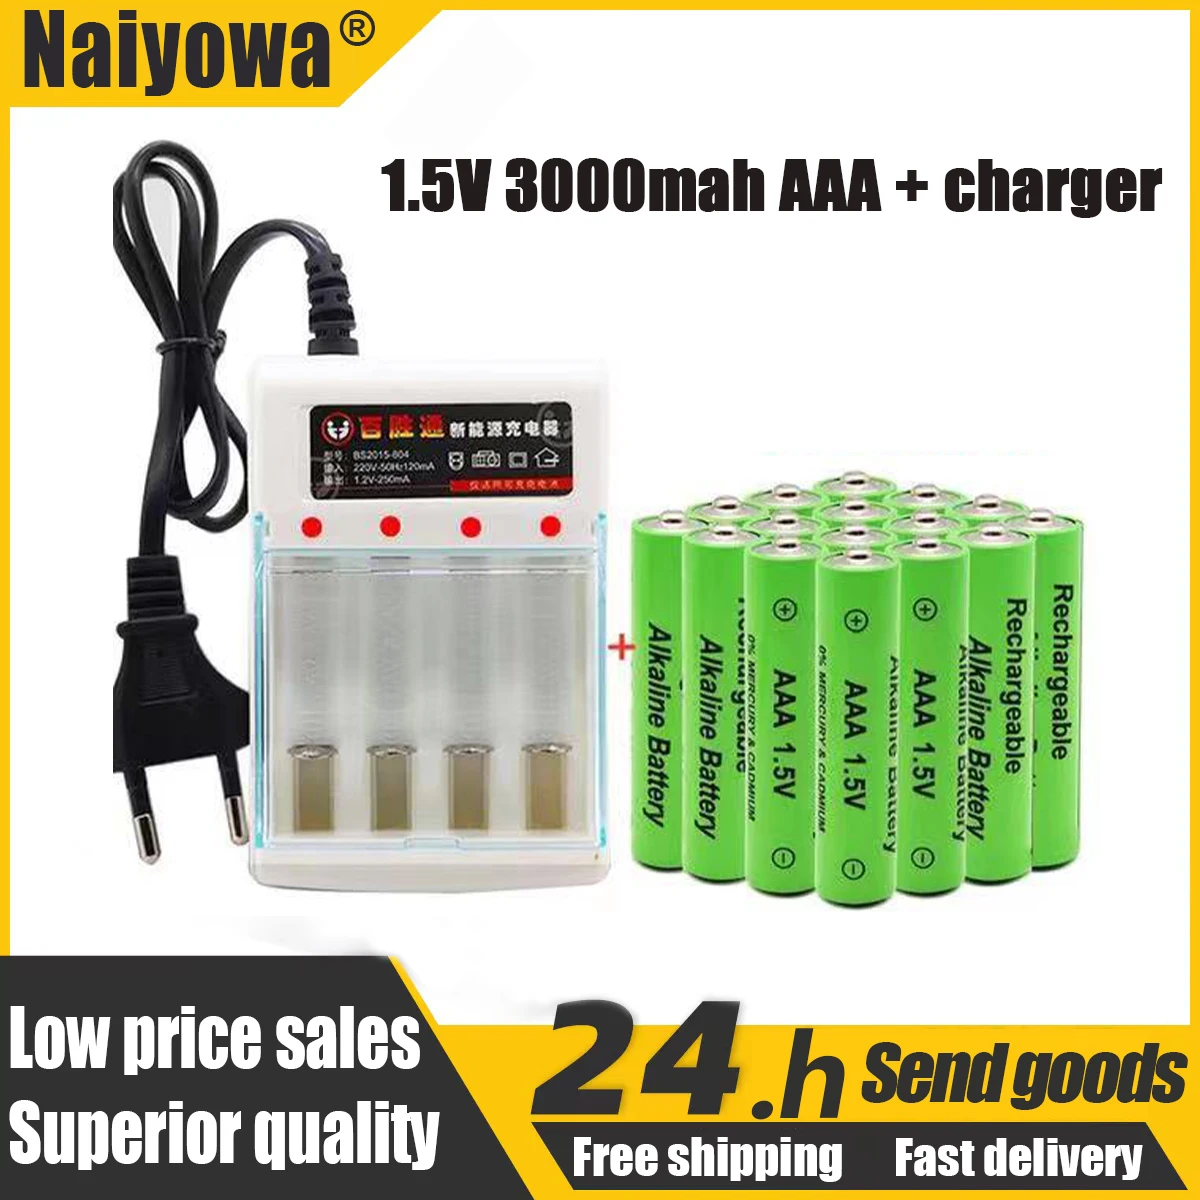 

Free Delivery Battery Charger+Rechargeable 3000mAh Battery AAA 1.5V Can Be Used for Clock Toy Flashlight Brand New AAA Battery